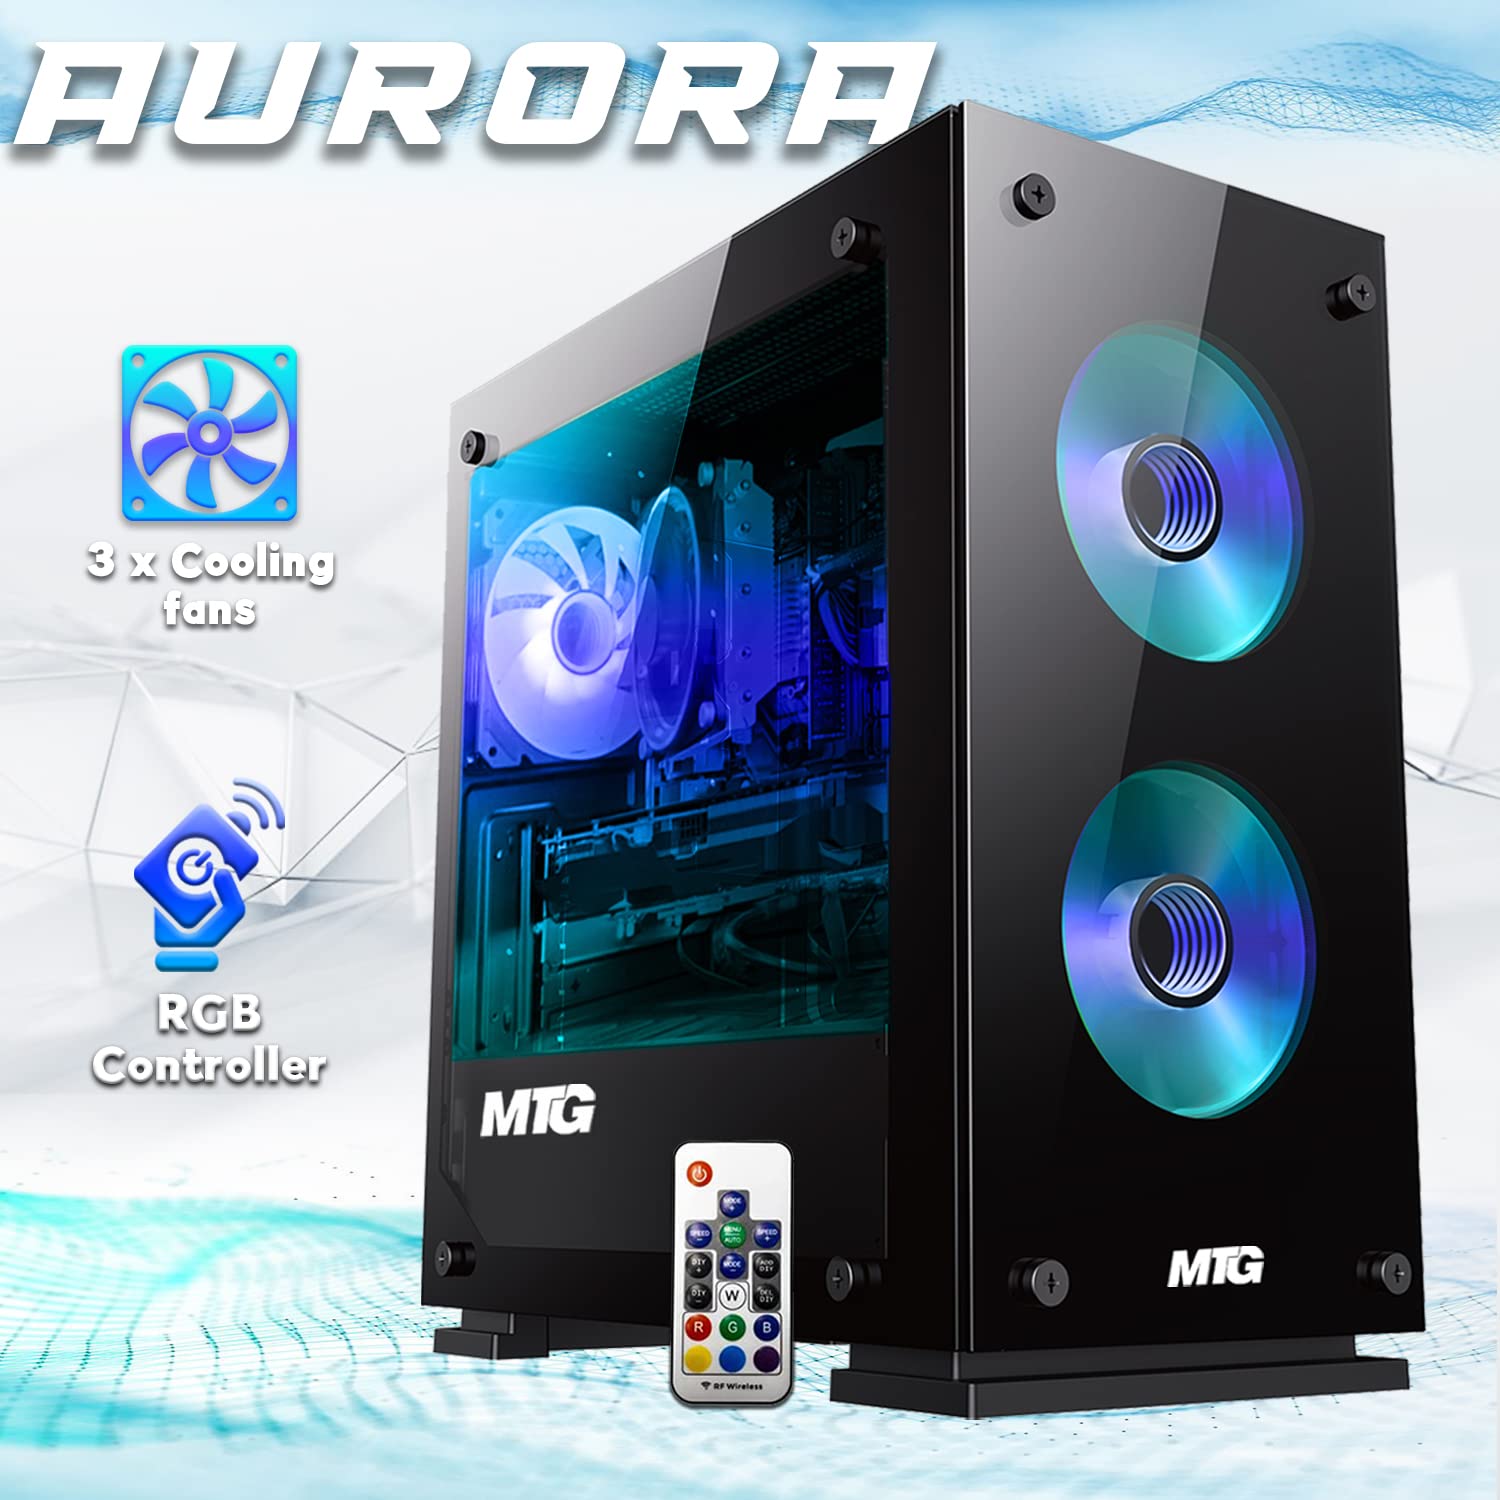 MTG Aurora 4T Gaming Tower PC- Intel Core i7 4th Gen, AMD RX 580 GDDR5 8GB 256bits Graphic, 16GB Ram DDR3, 512GB Nvme, RGB Keyboard Mouse and Headphone, Webcam, Win 10 Home